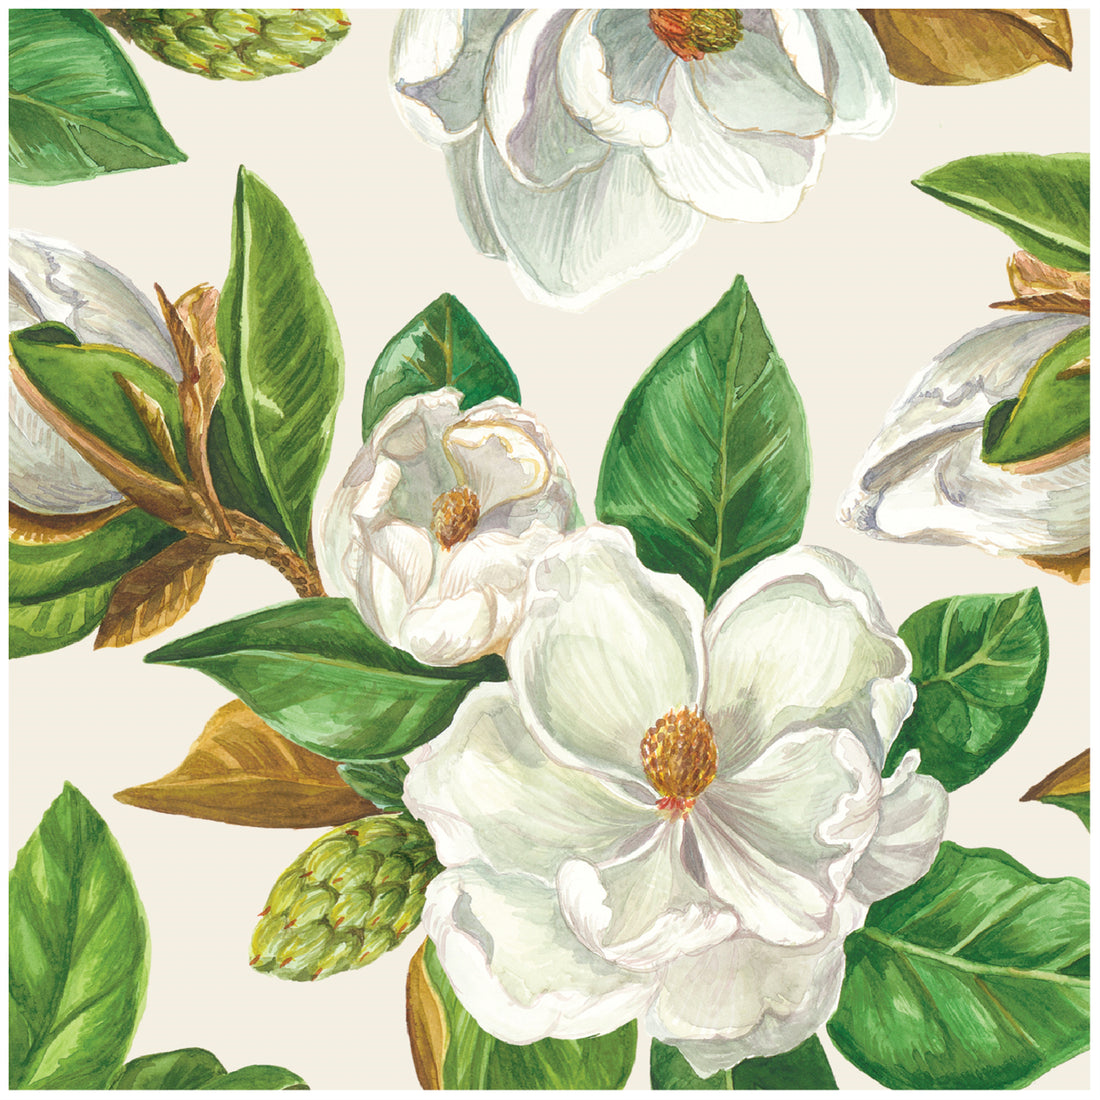 A square cocktail napkin featuring illustrated white magnolia blossoms with brown and green leaves and stems, on a white background.